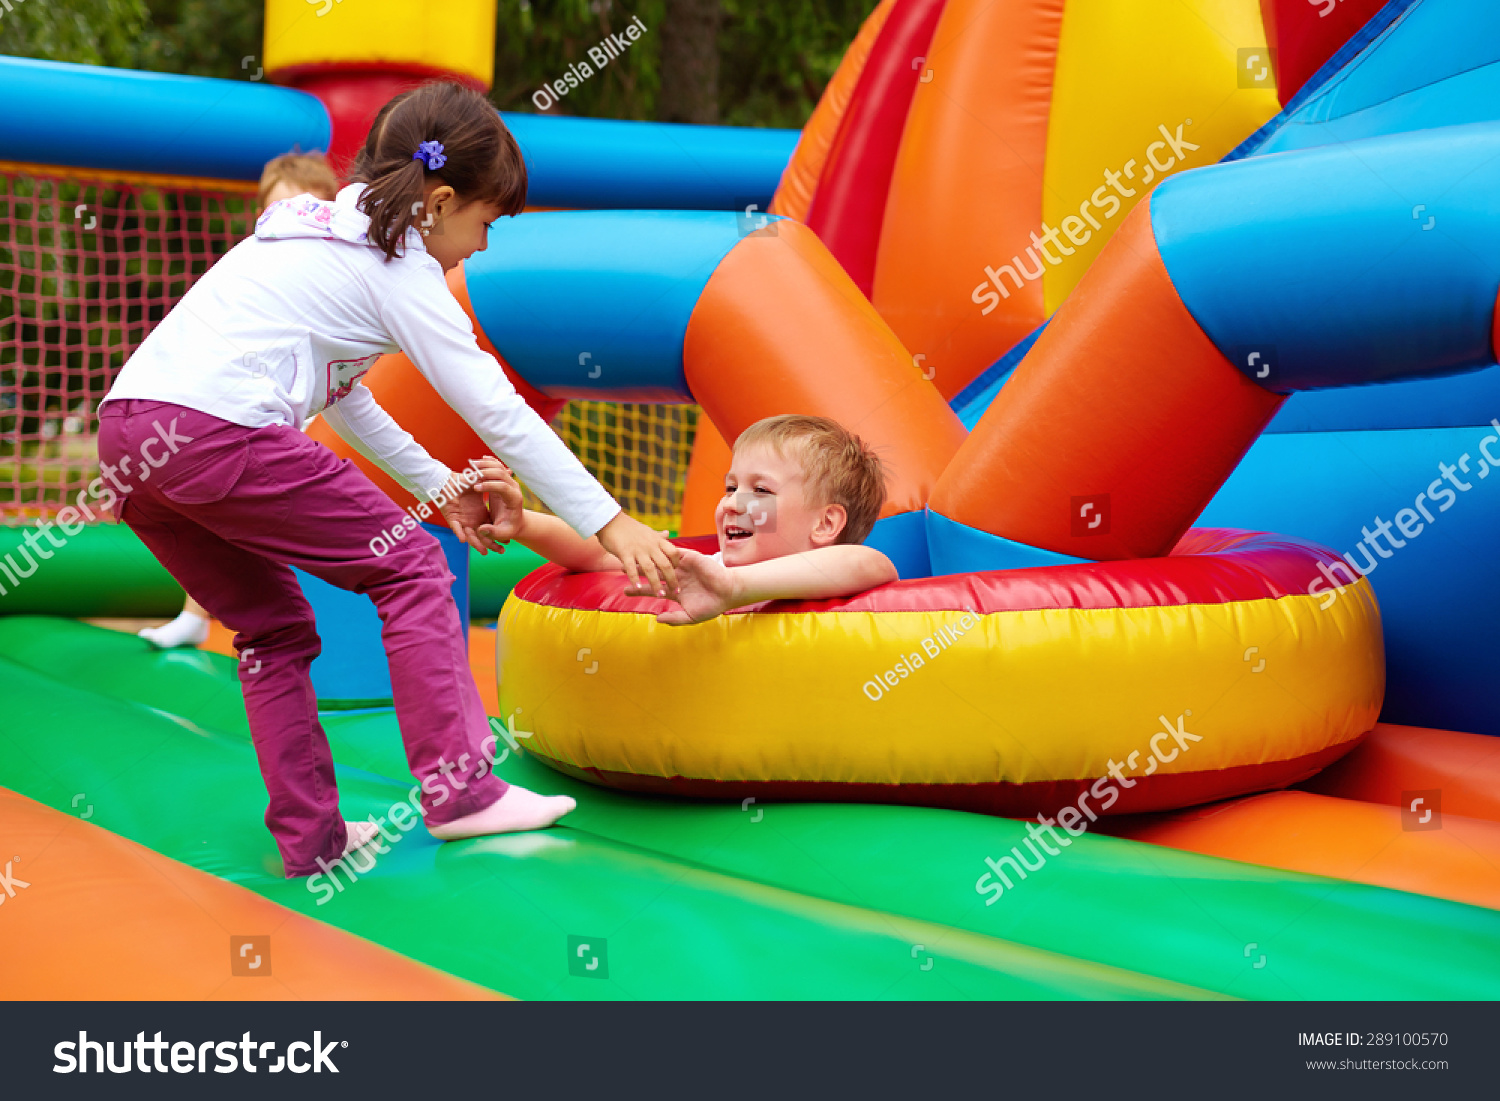 happy kids having fun on inflatable attraction playground #289100570